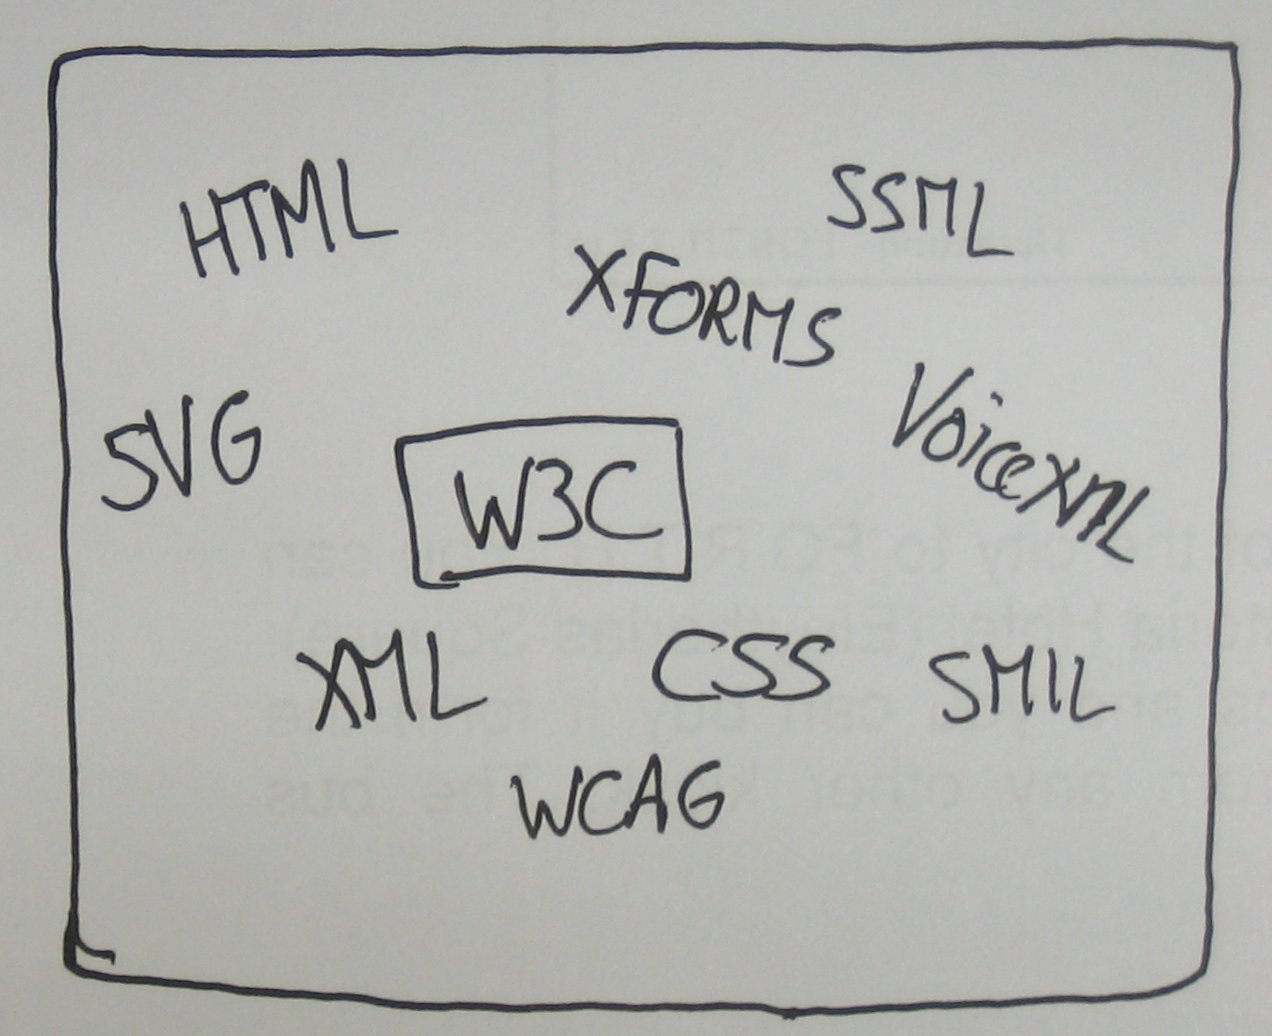 W3C Specifications